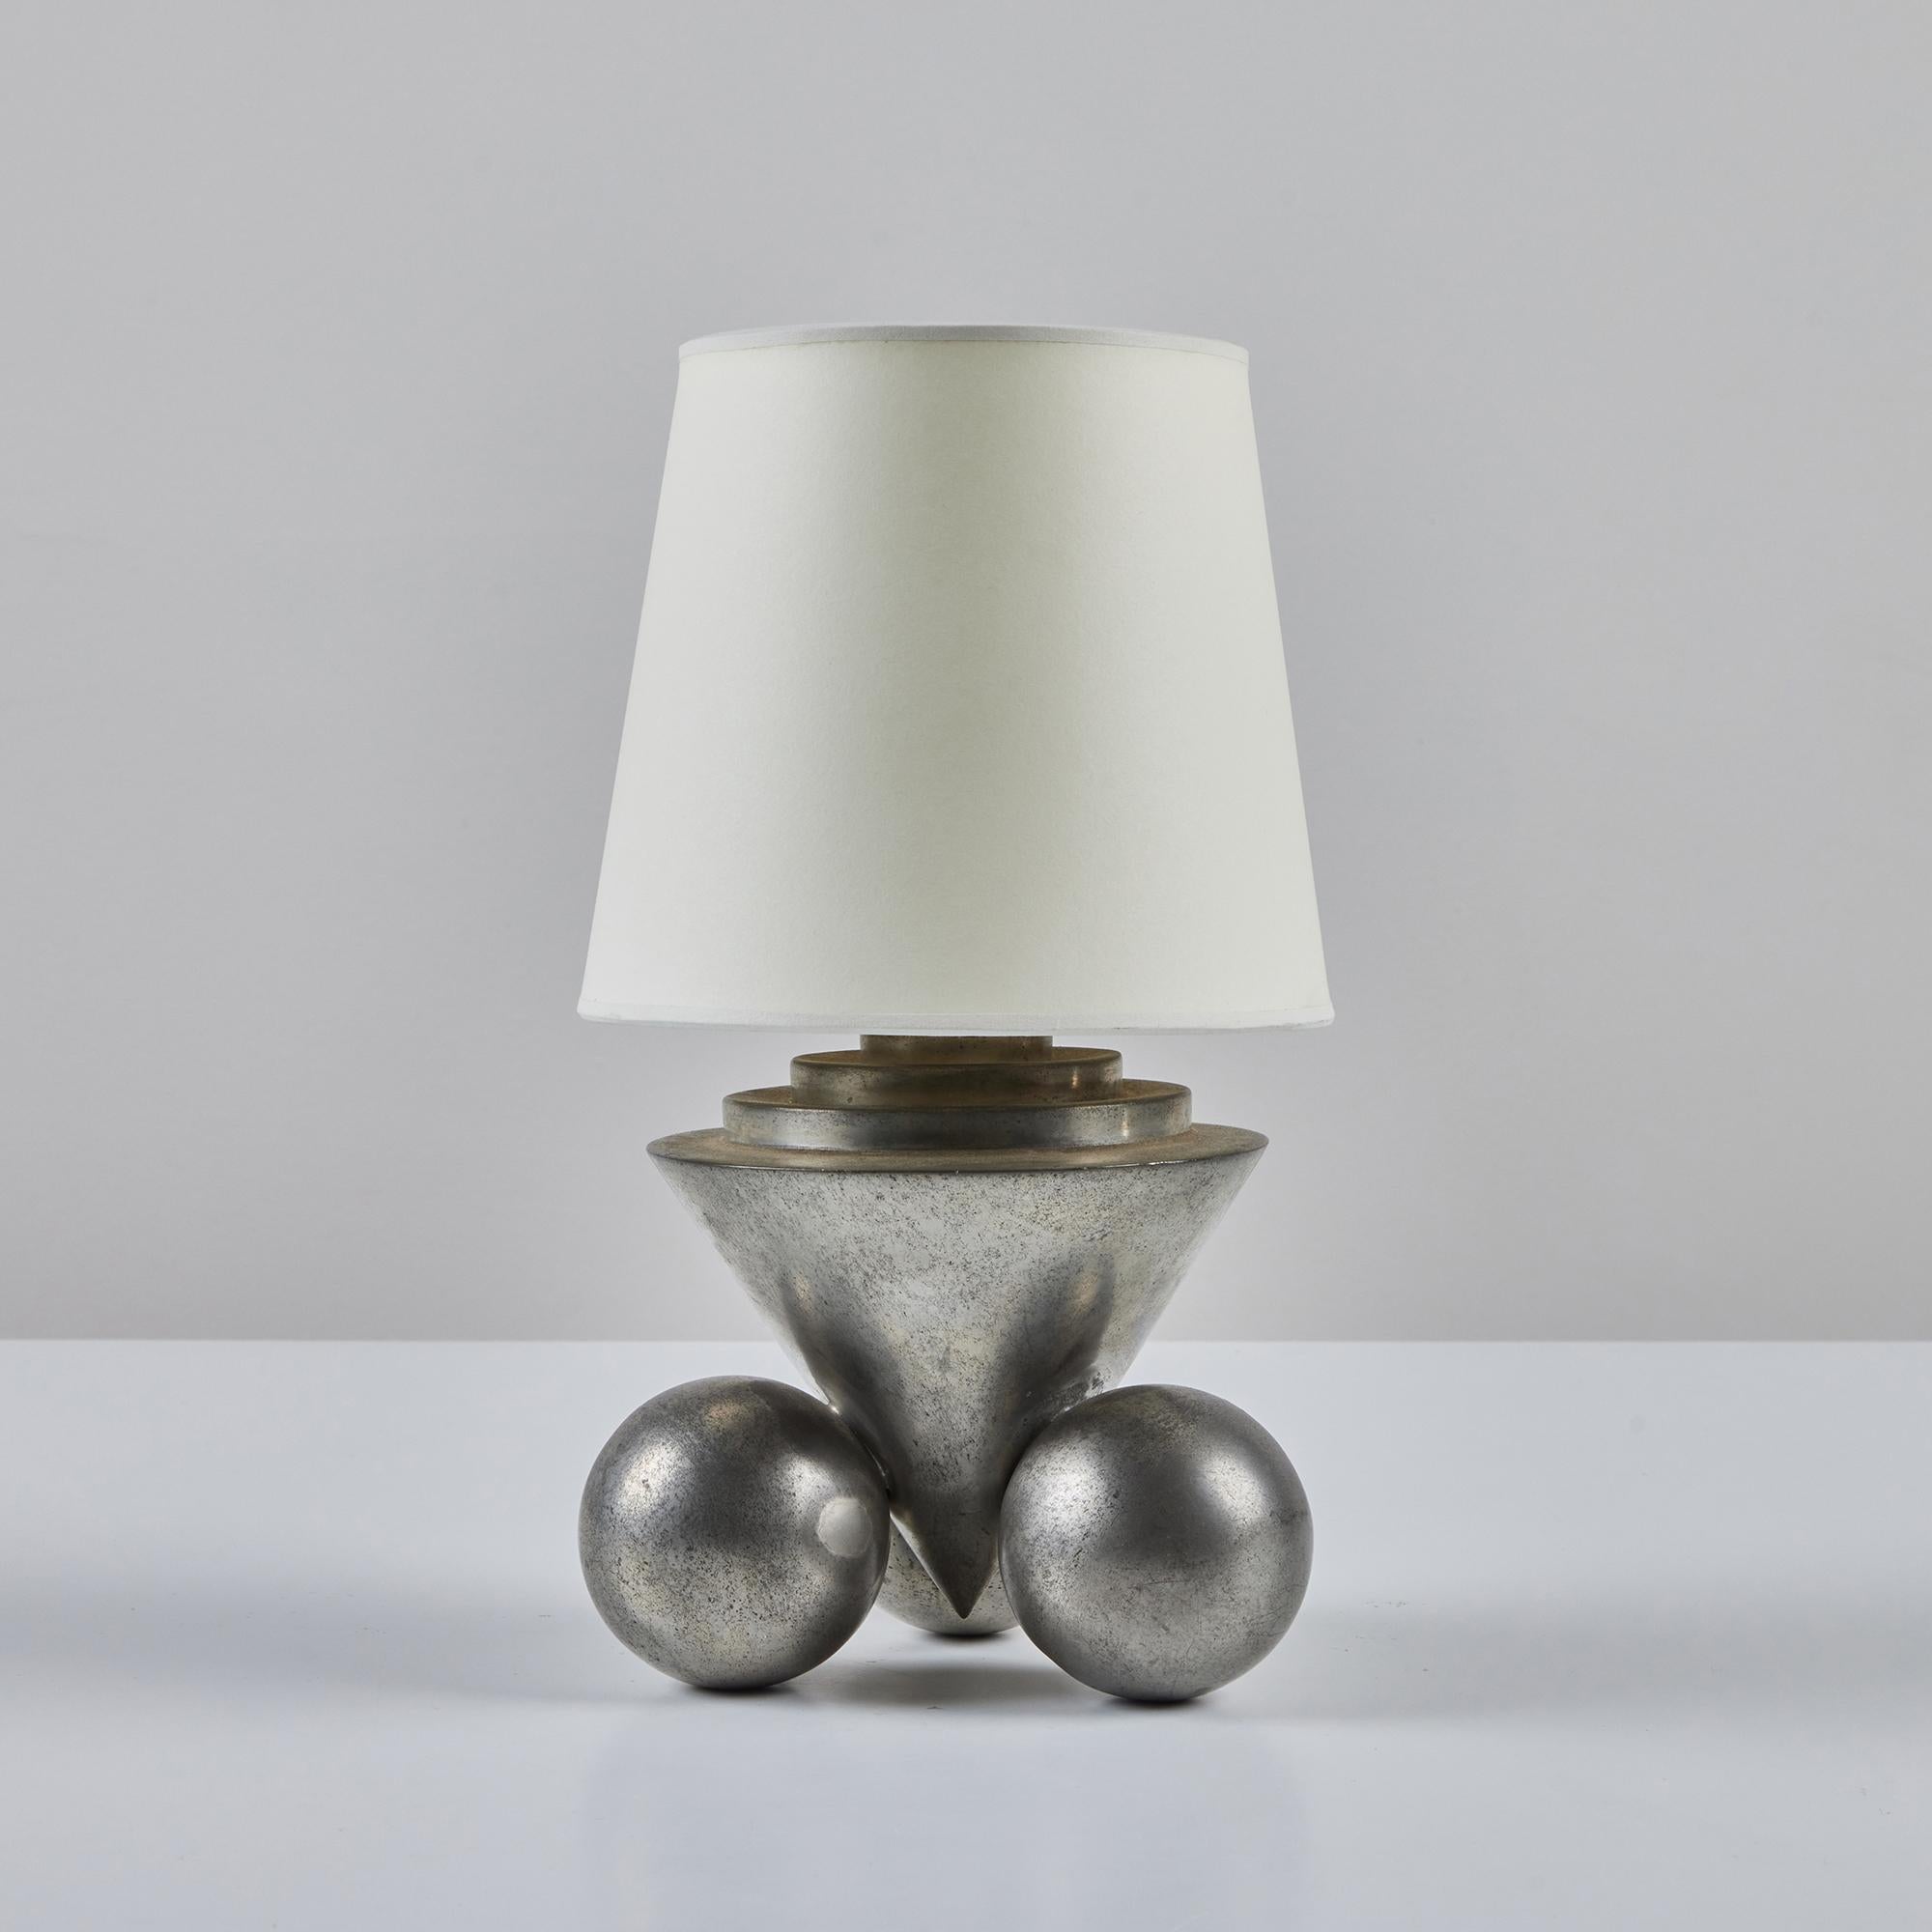 Petite Art Deco aluminum table lamp in the style of Chase USA. This lamp features an aluminum body with a cone center and three sphere feet. The lamp is finished with a new paper shade. The lamp has an on/off switch on the cord with two light